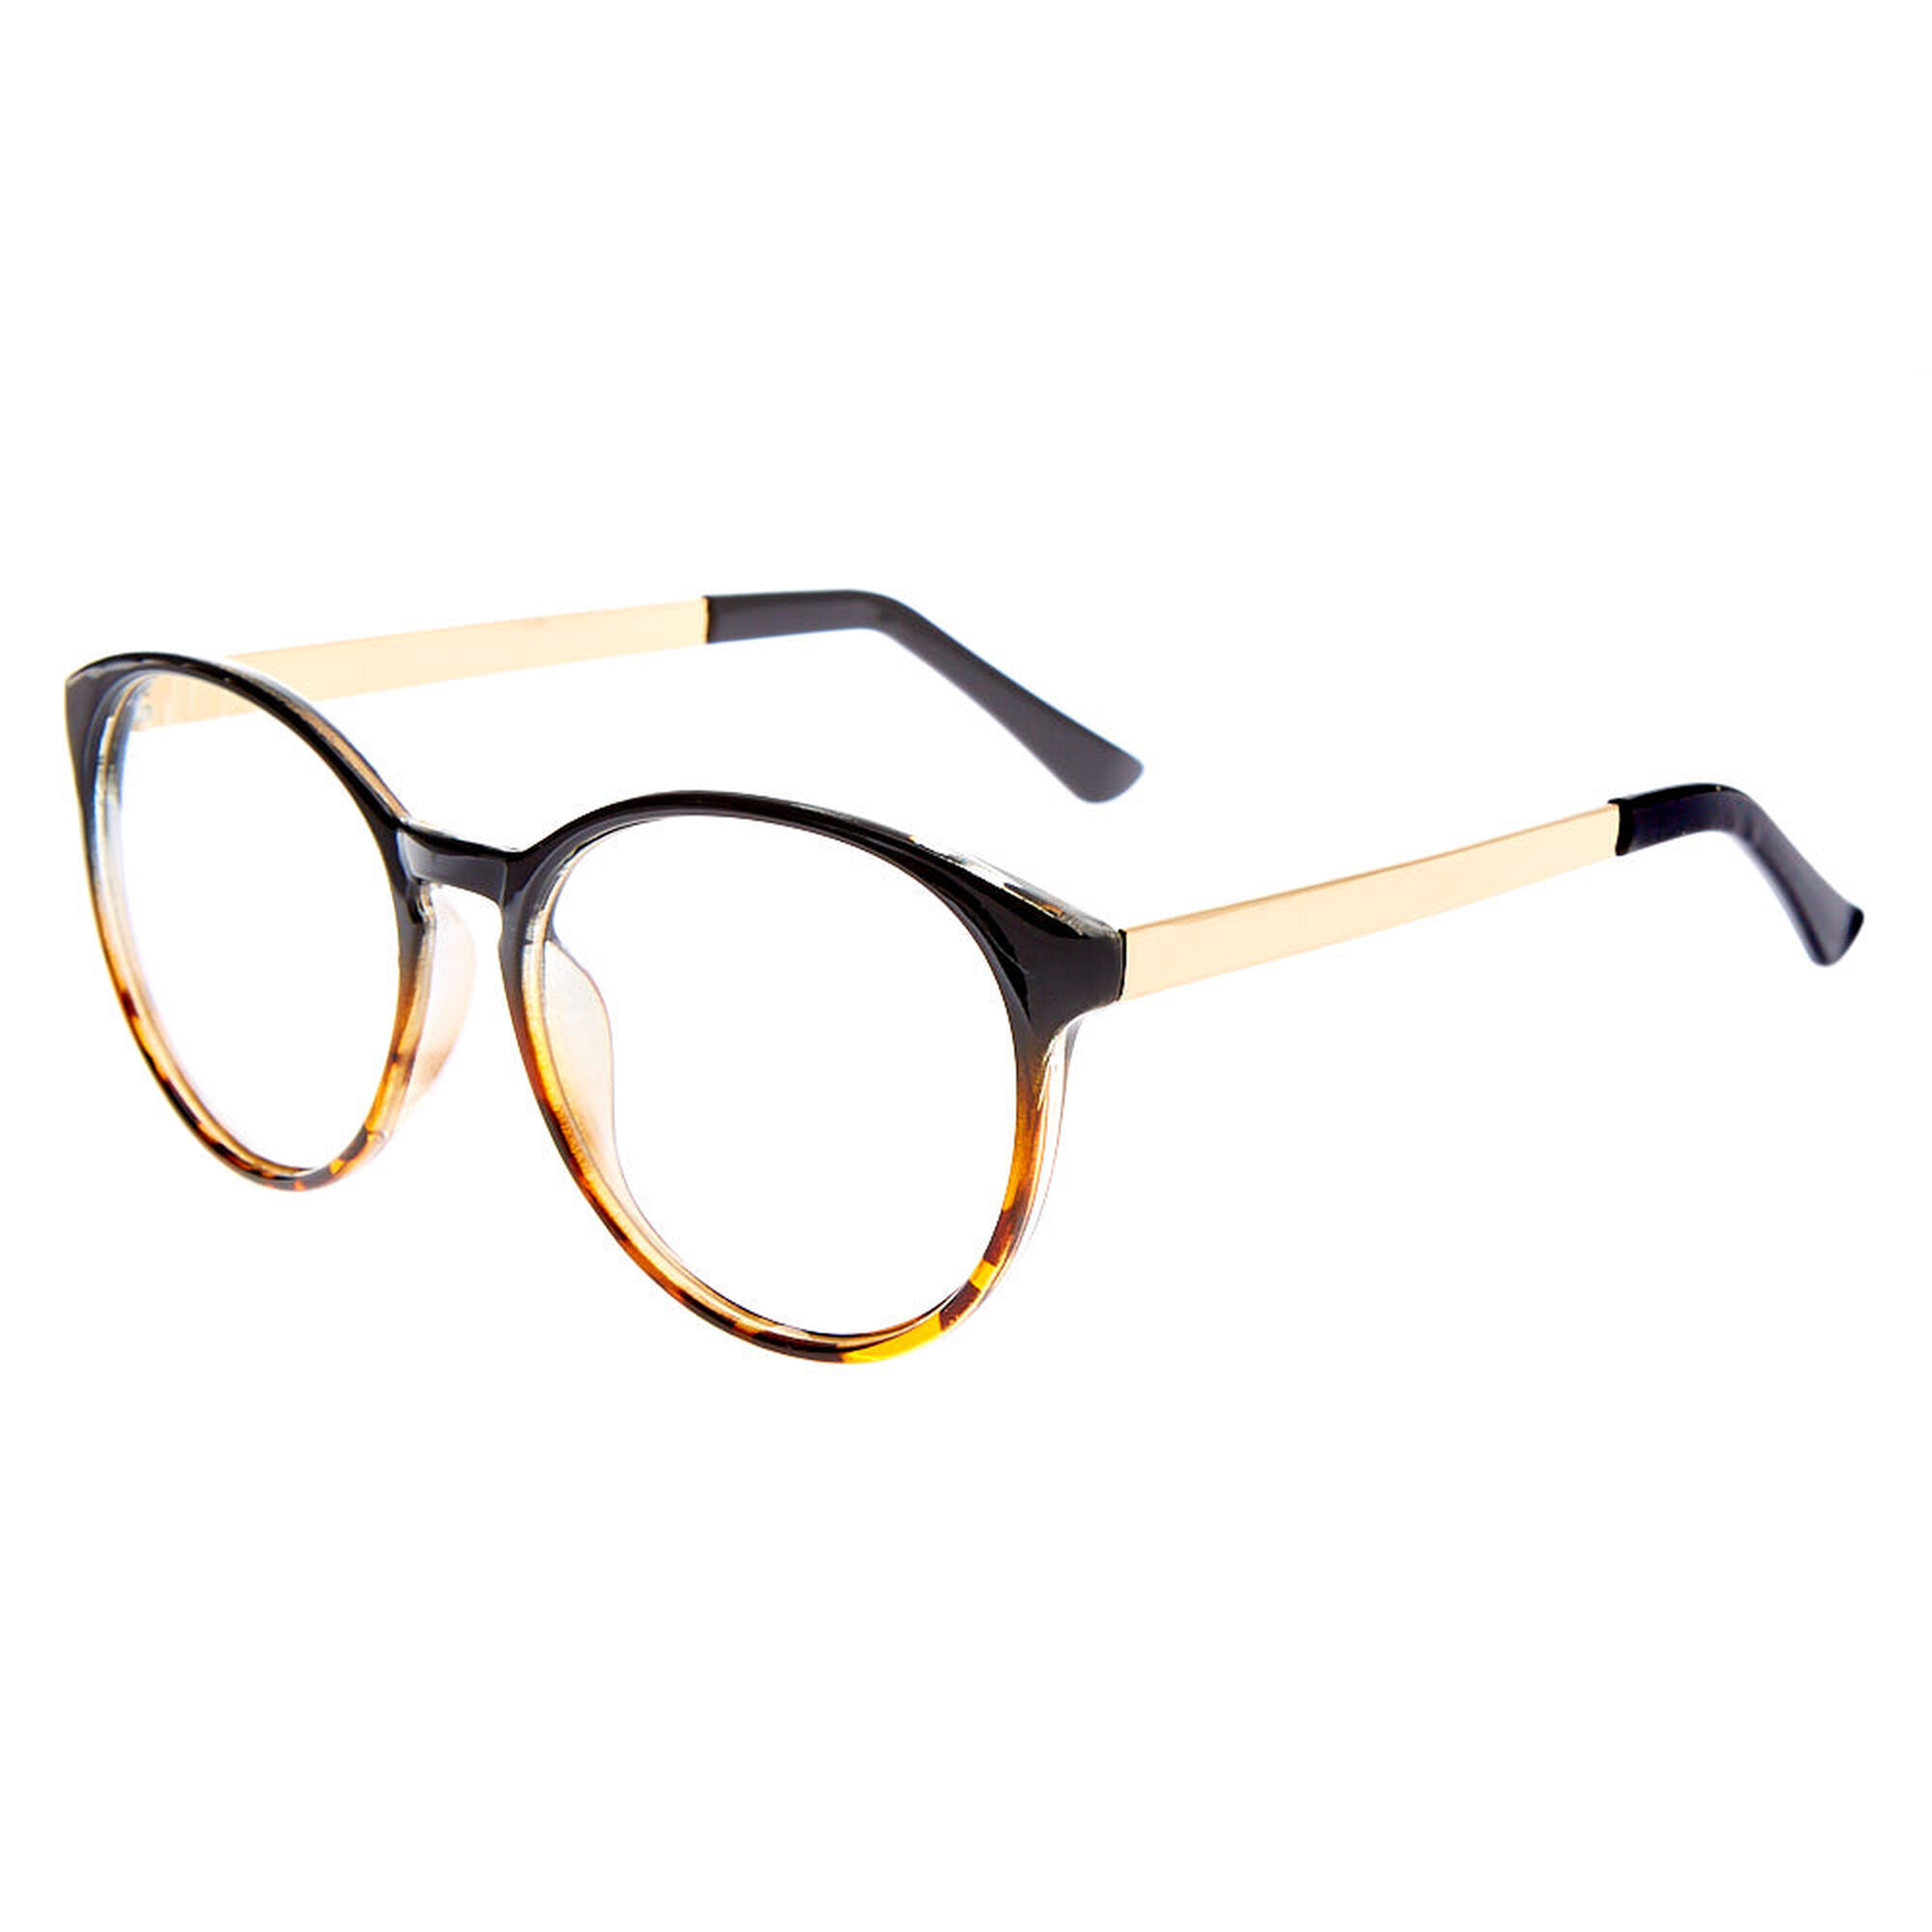 View Claires Round Ombre Tortoiseshell Clear Lens Frames Black information